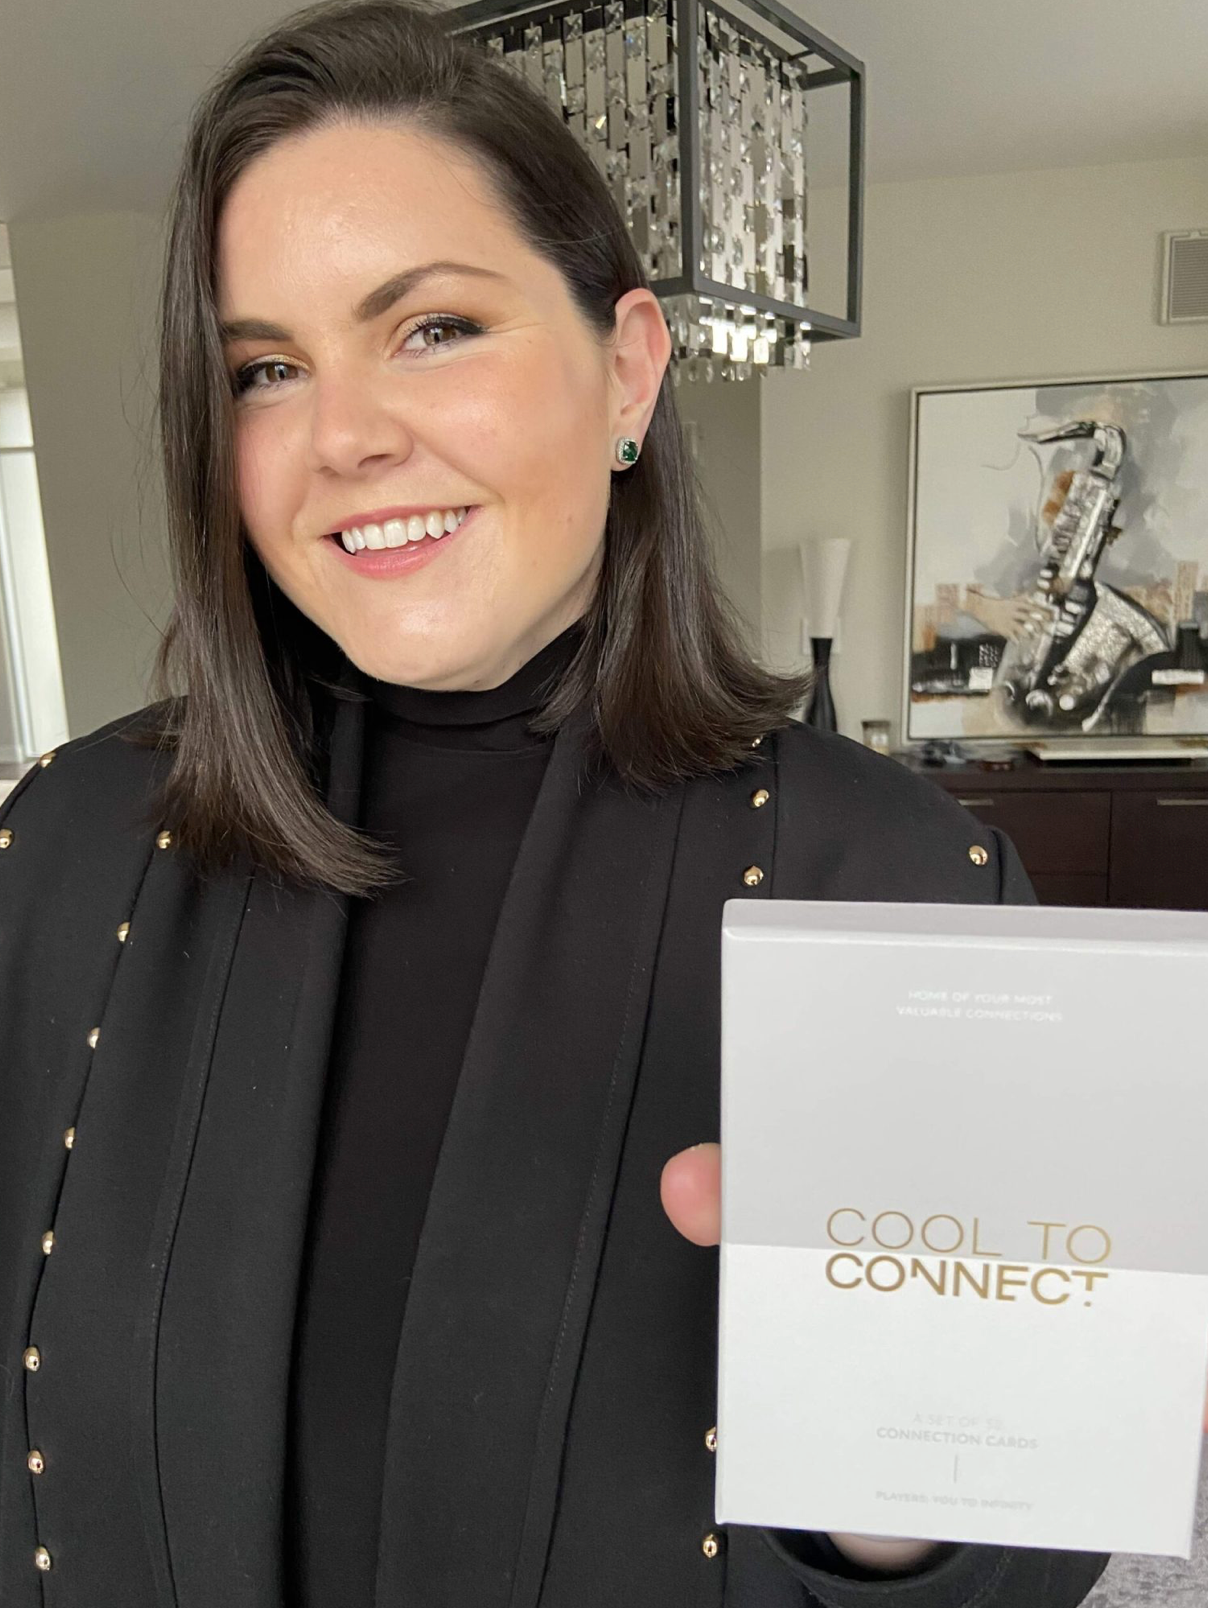 Local News Recognition for Cool To Connect and Founder Dana Clark